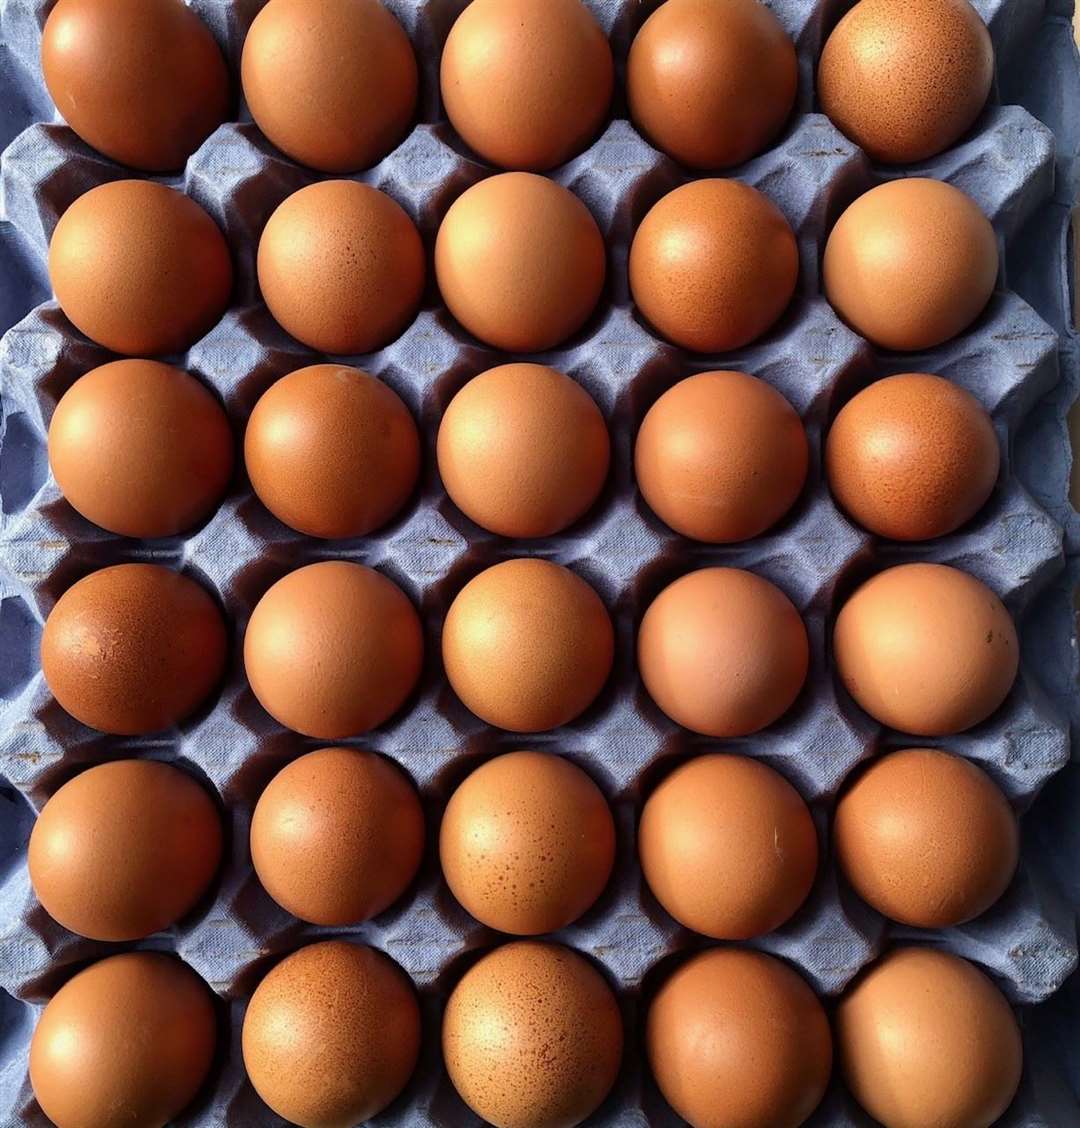 Eggs will carry new labelling from Monday